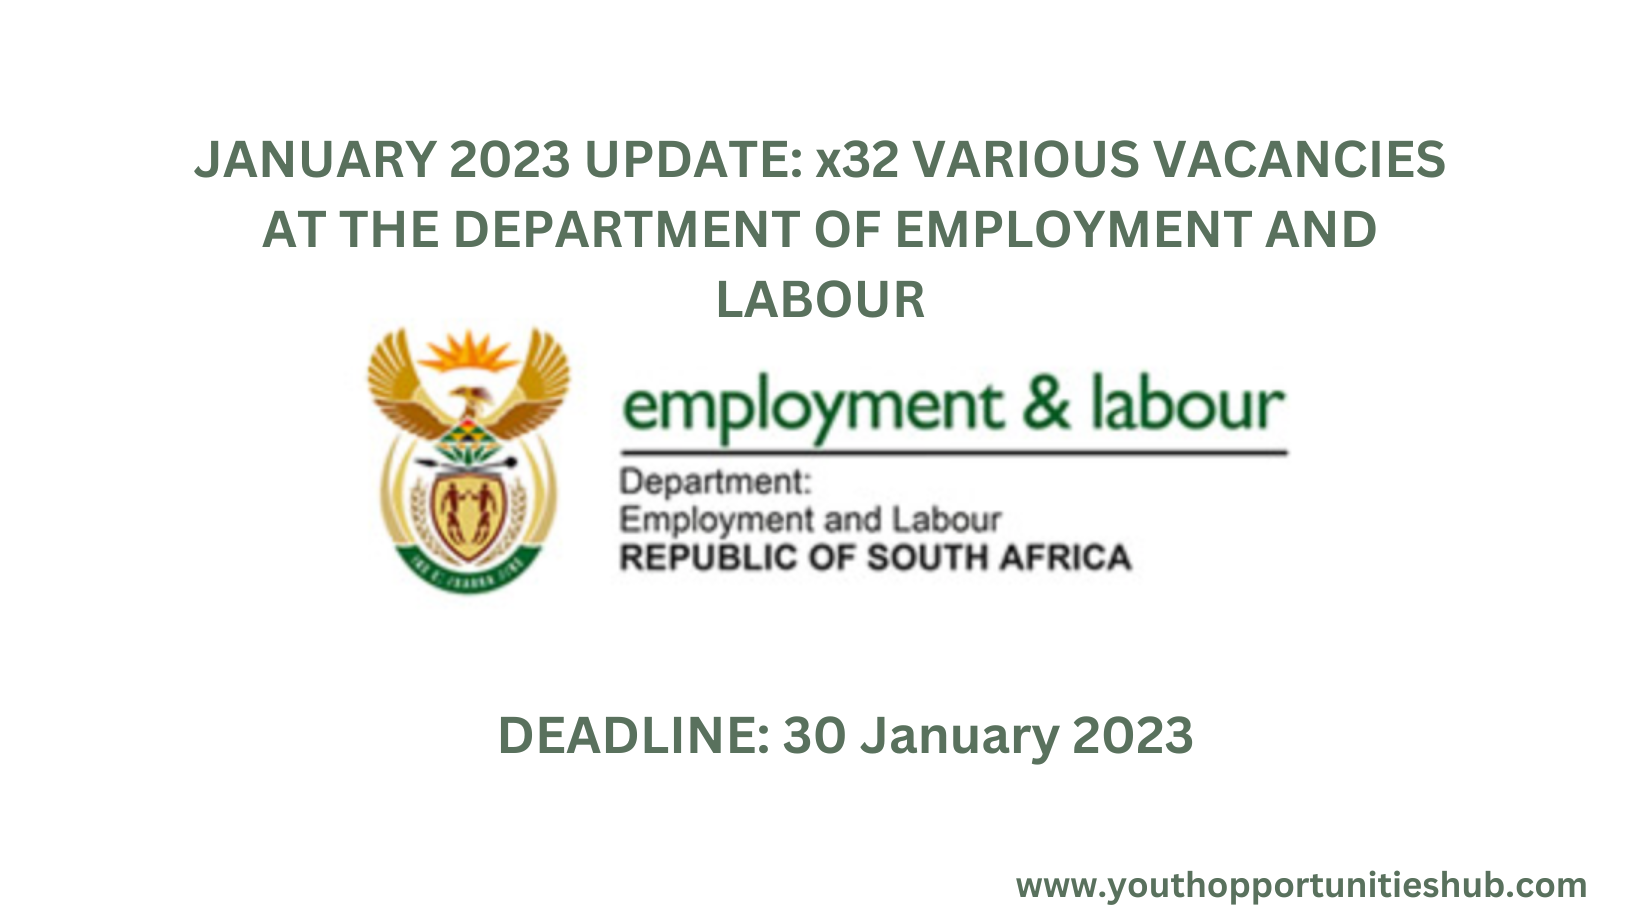 JANUARY 2023 UPDATE x32 VARIOUS VACANCIES AT THE DEPARTMENT OF